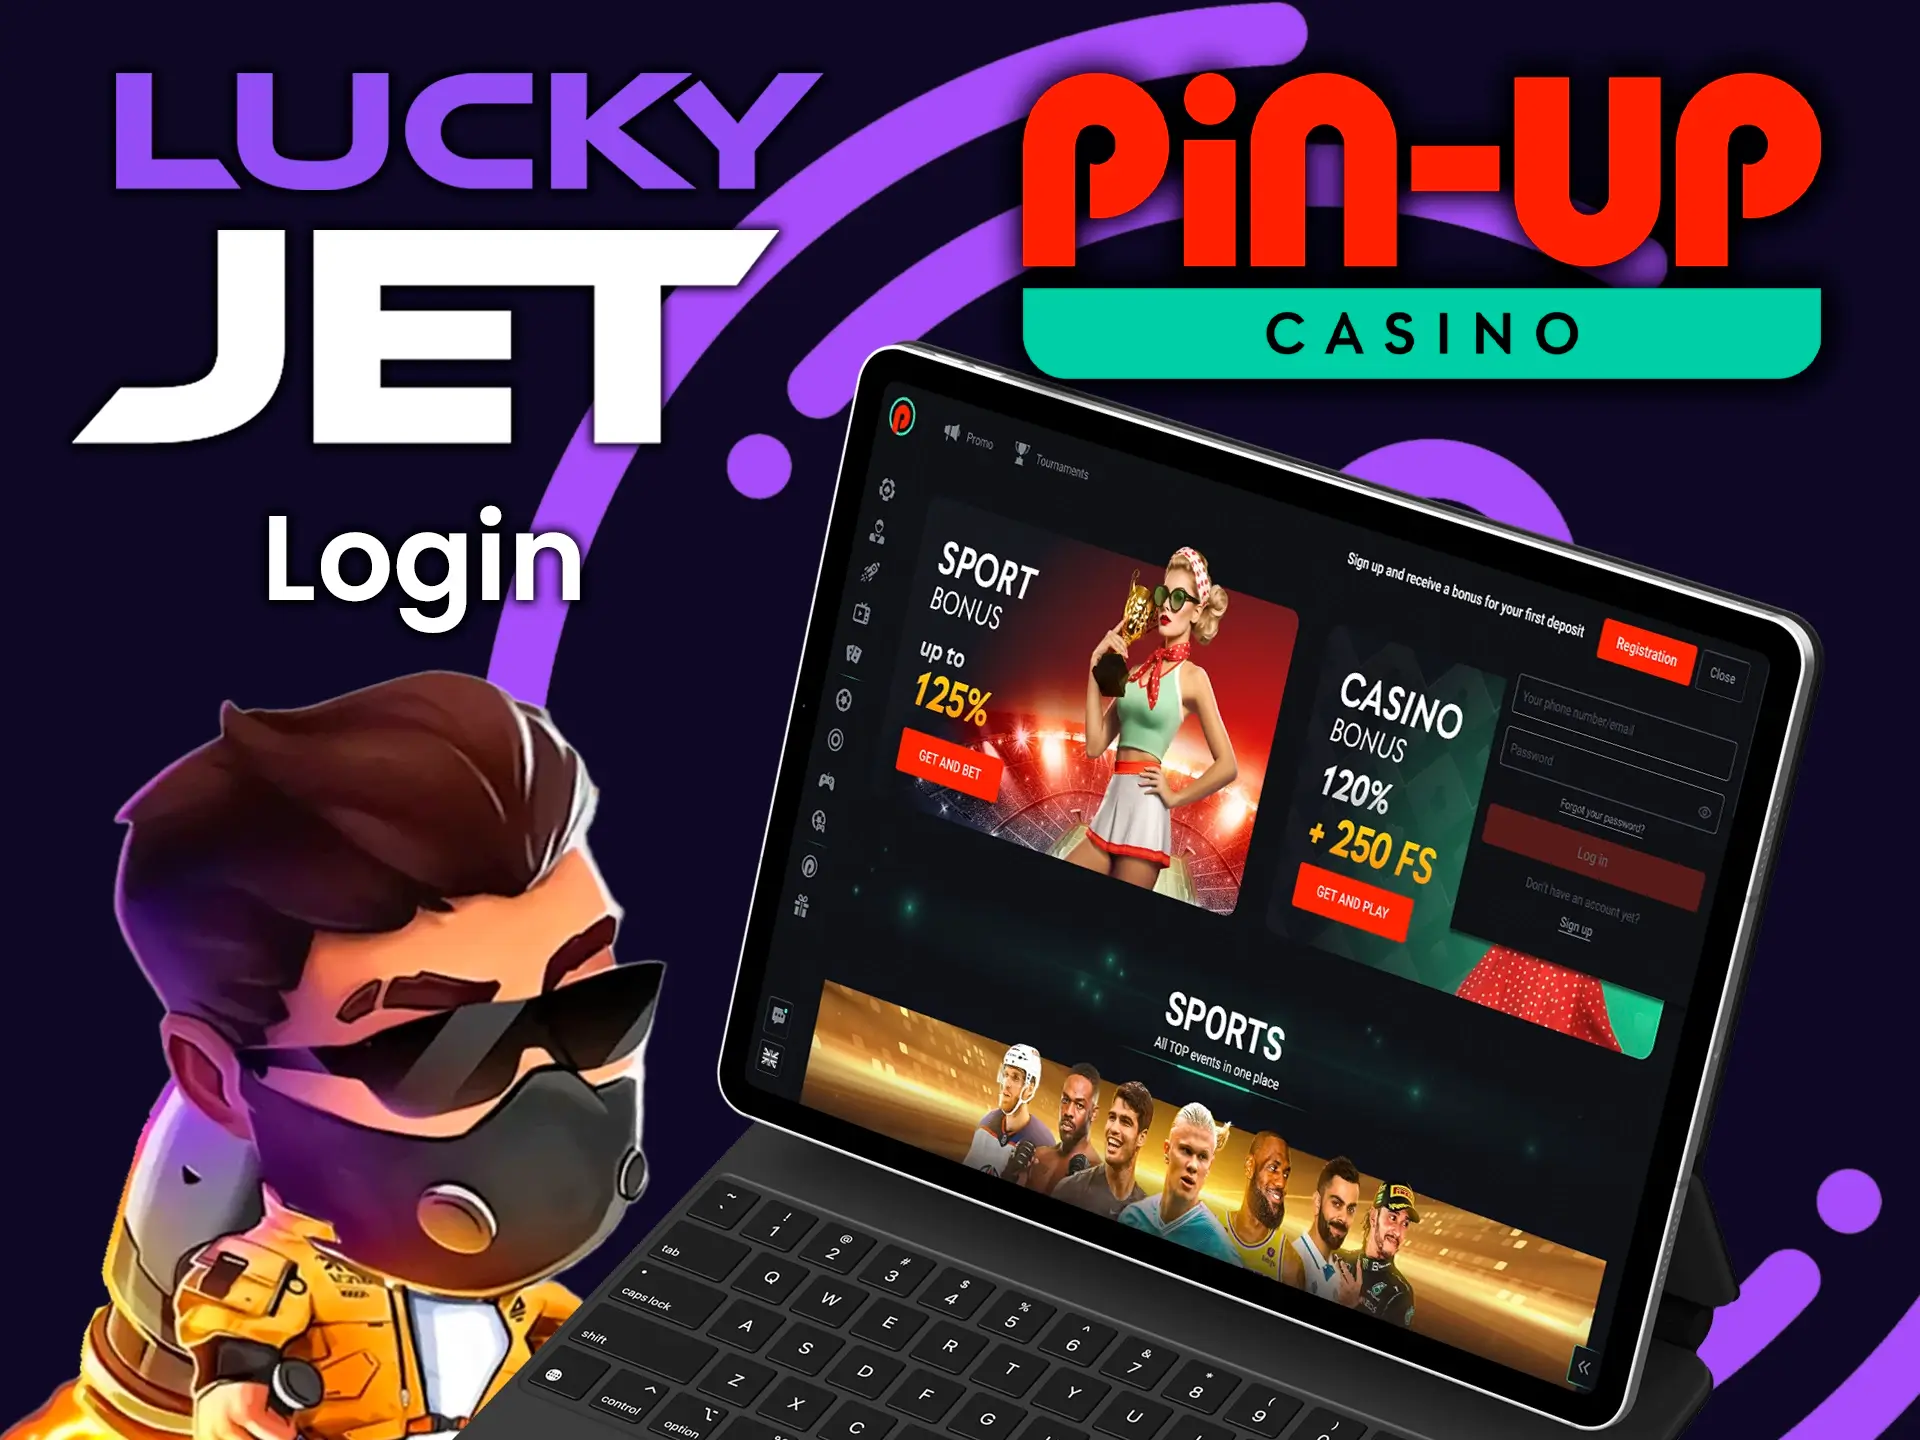 Log in to your personal Pin Up account to play Lucky Jet.